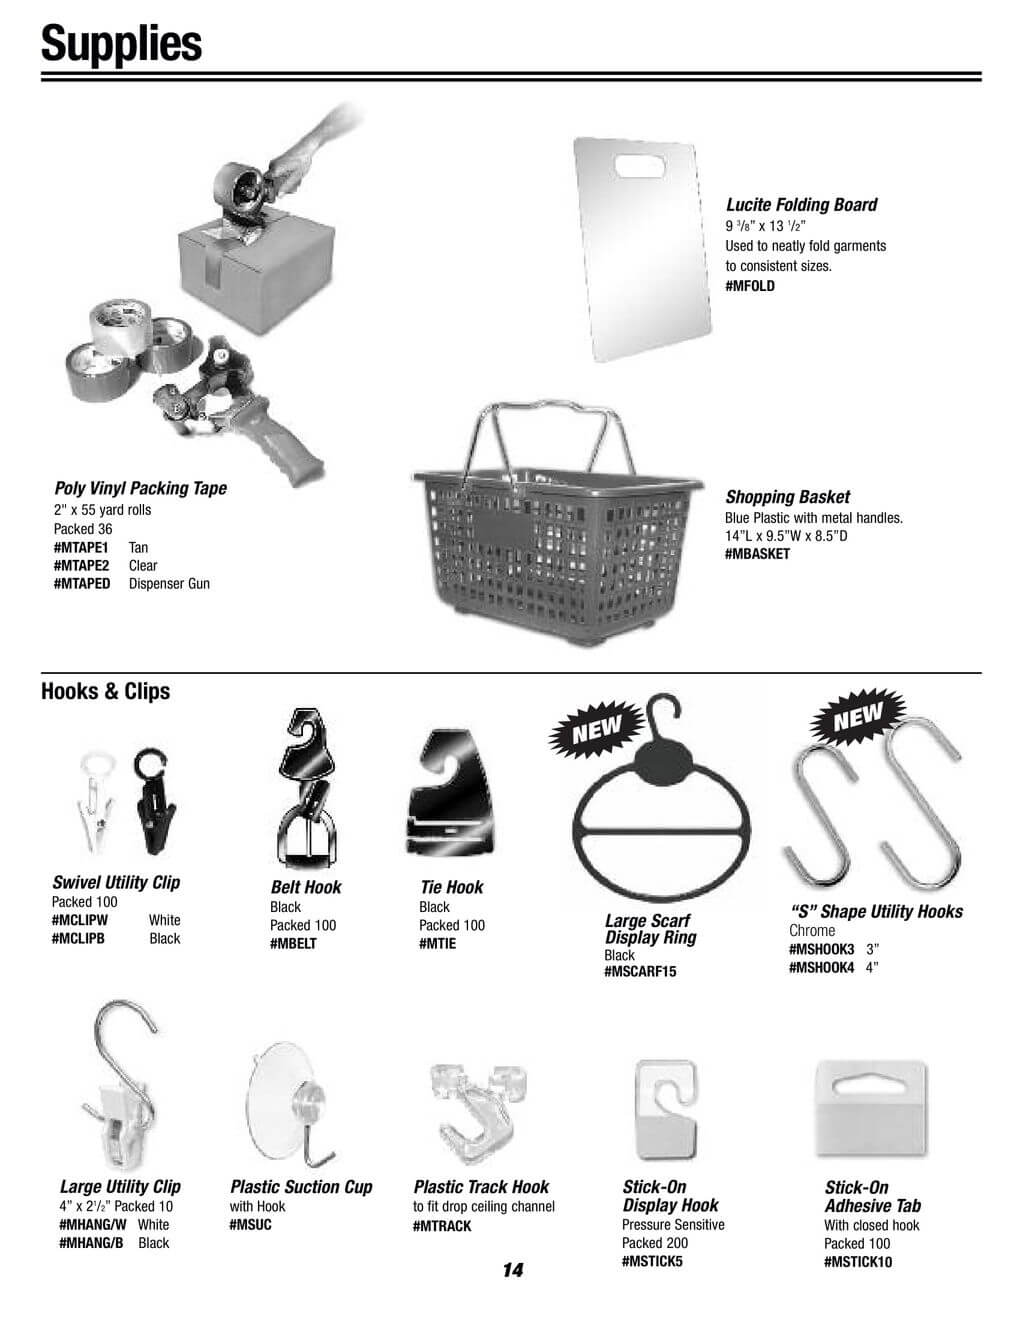 hooks and clips supplies